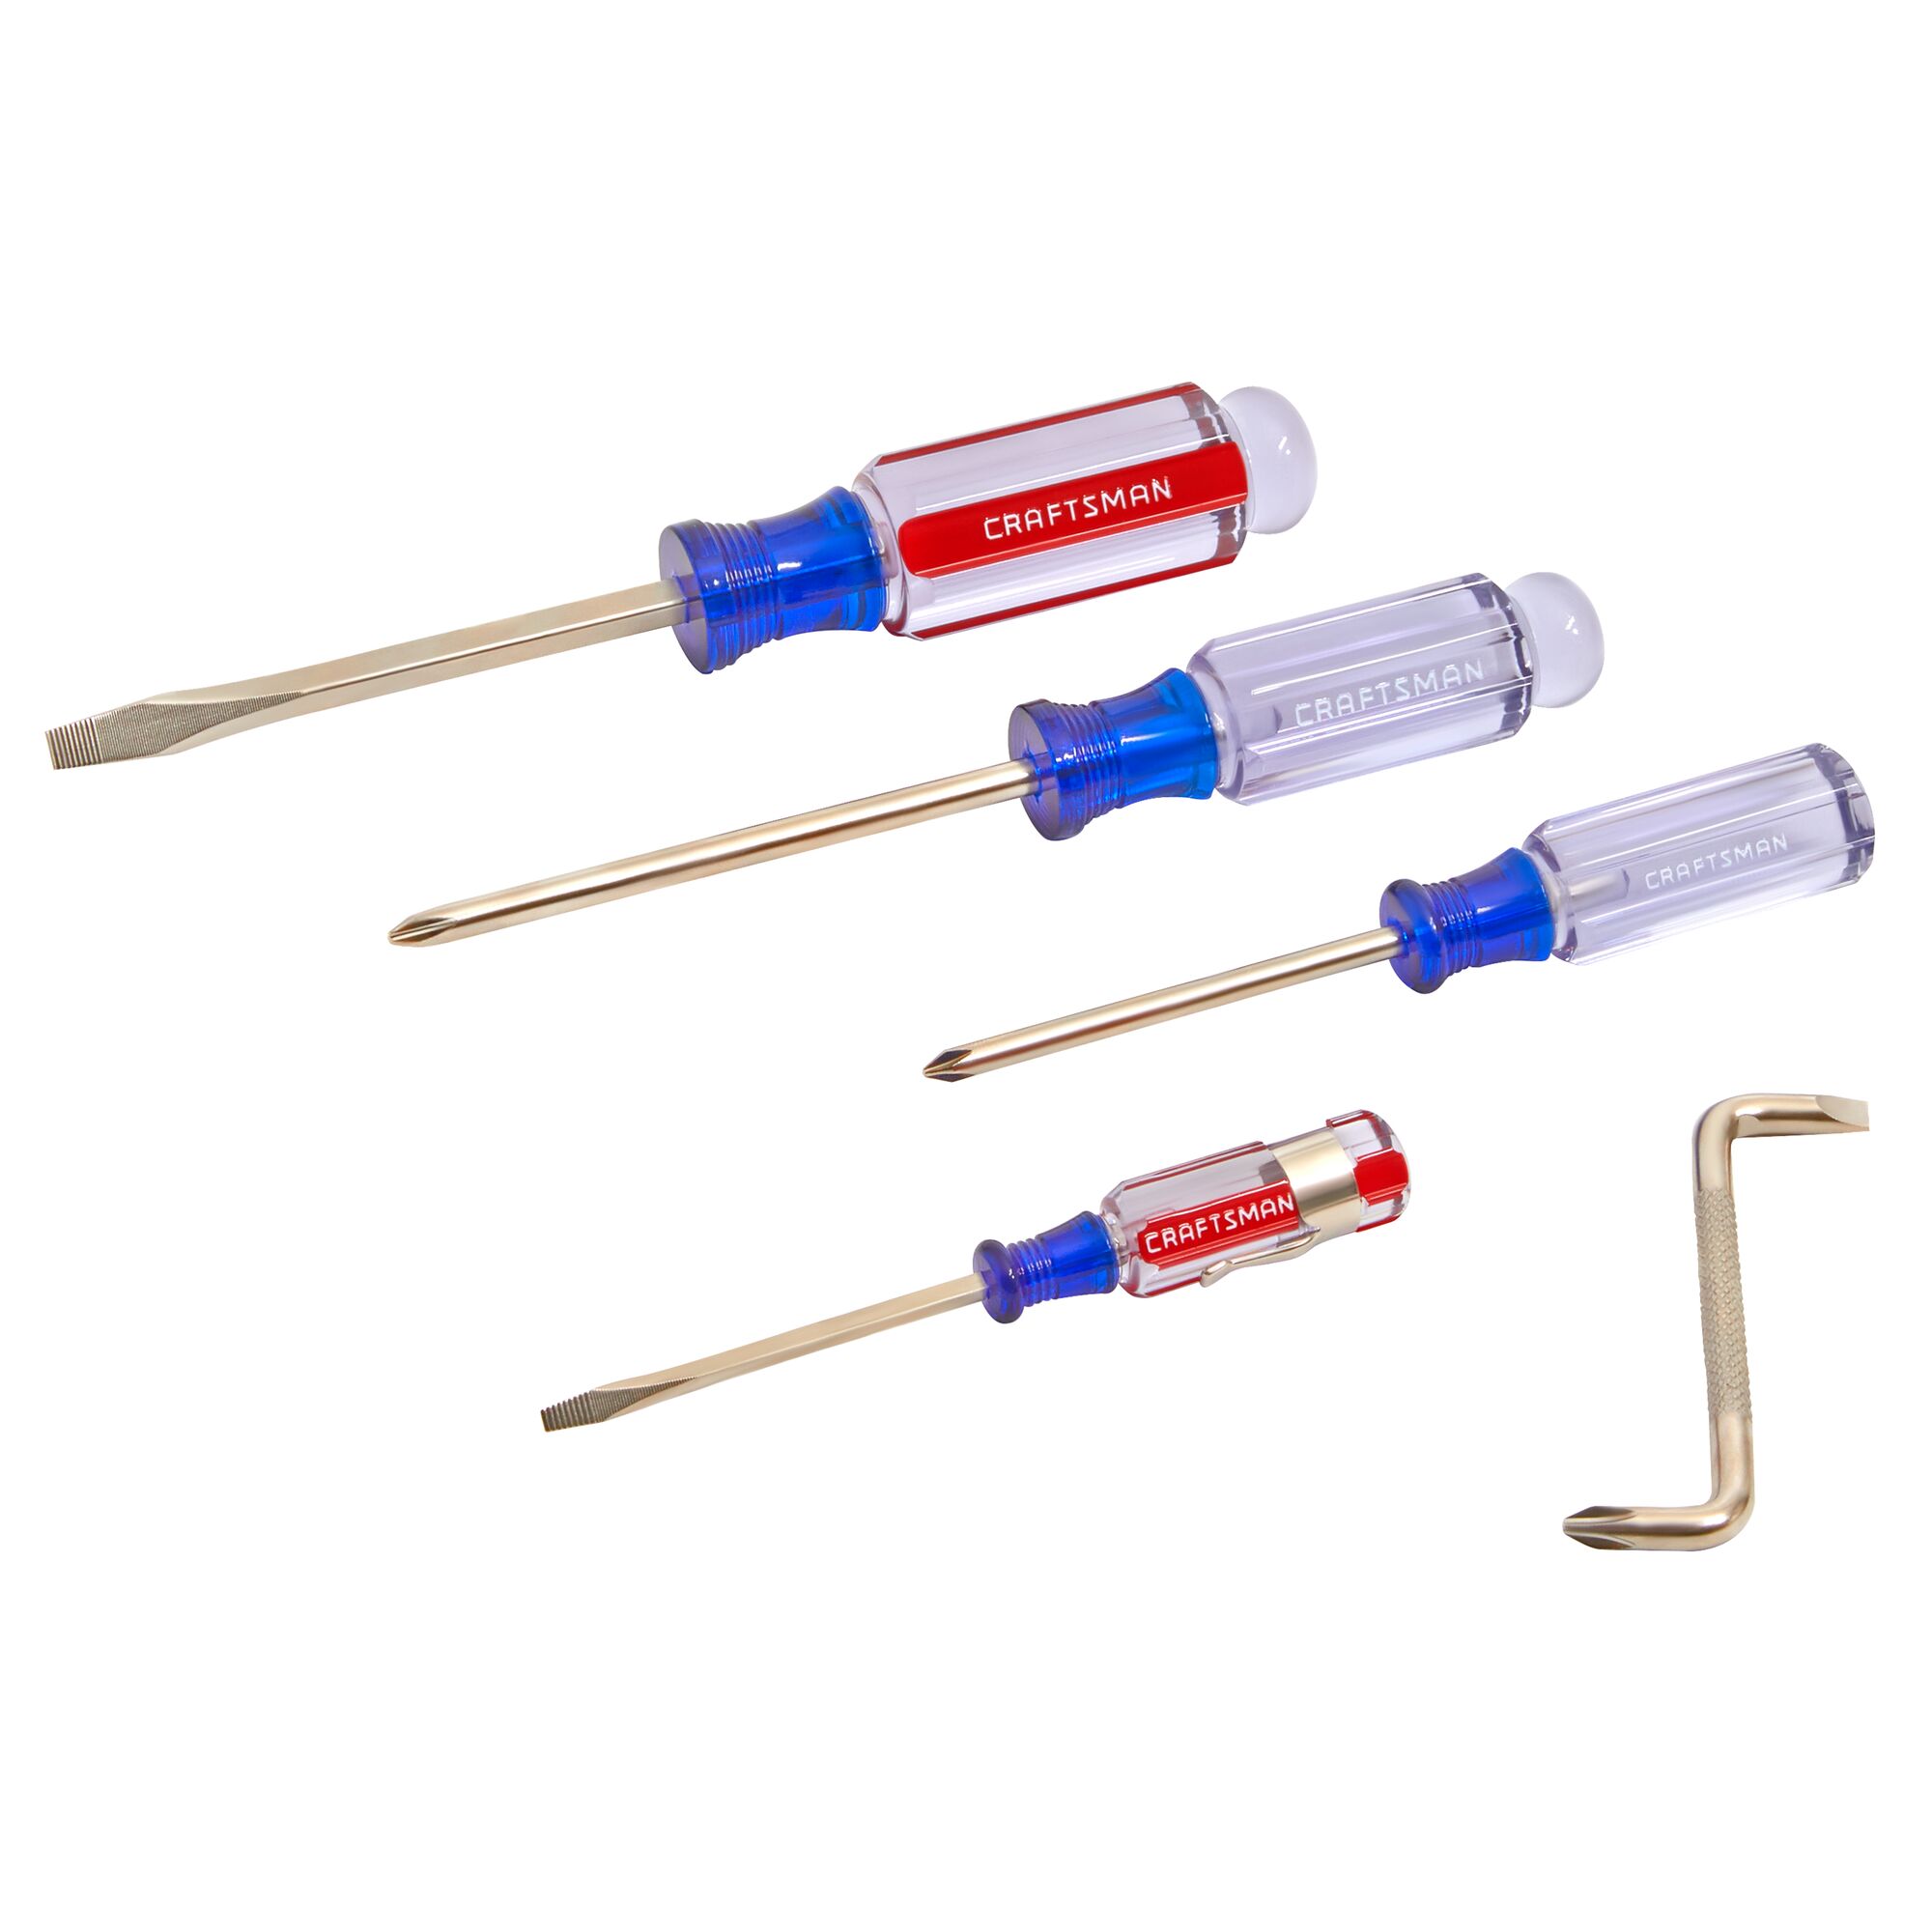 View of CRAFTSMAN Screwdrivers: Acetate on white background